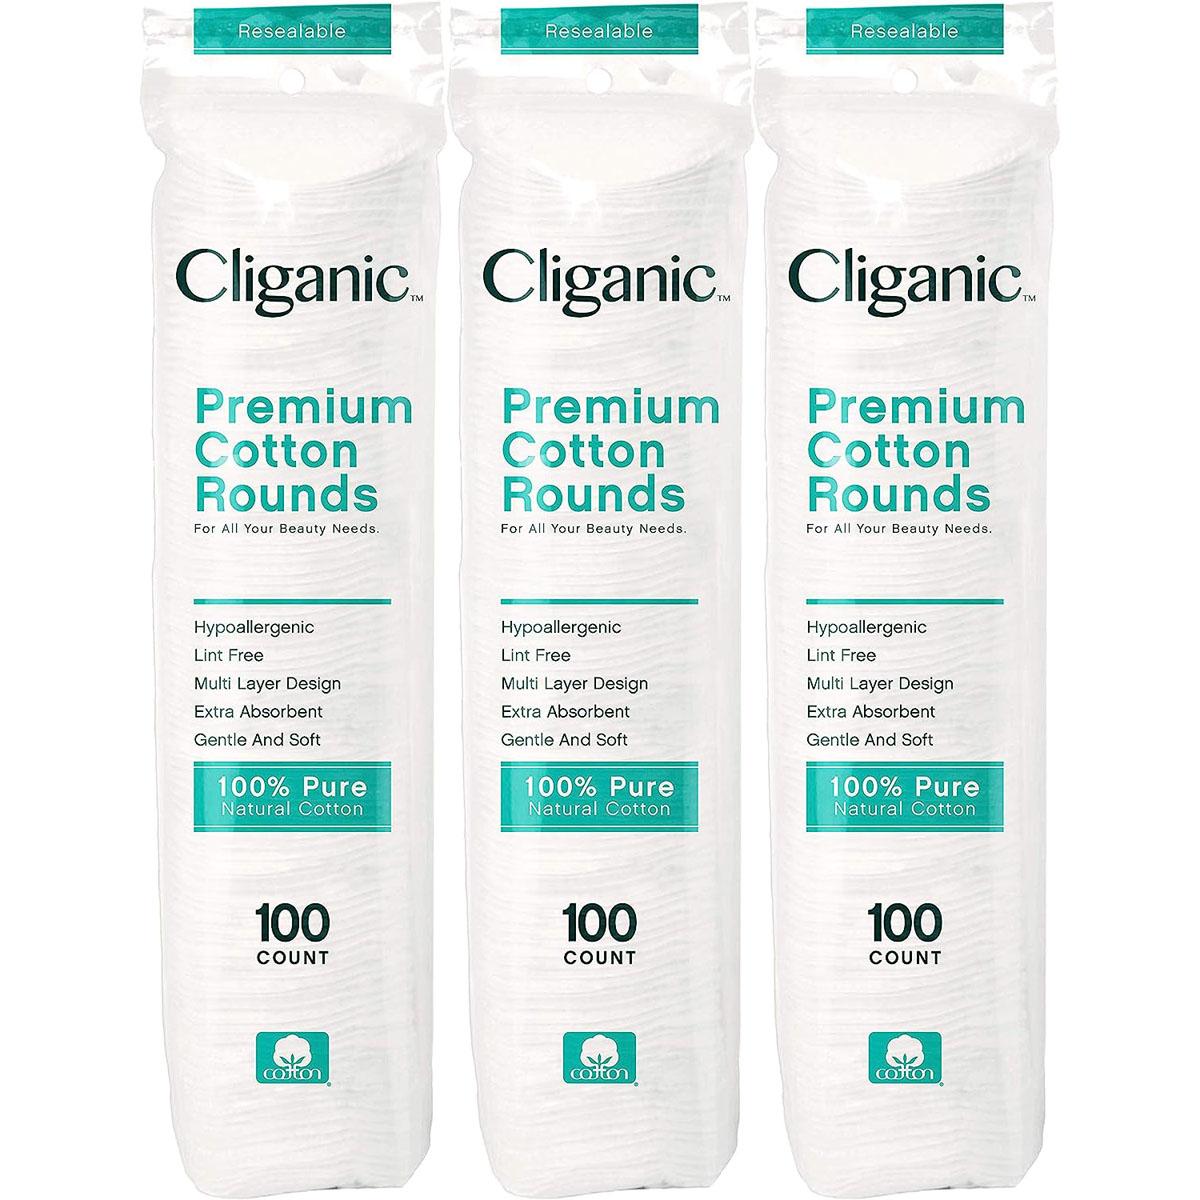 Cliganic Premium Cotton Rounds 300-Count for $5.58 Shipped